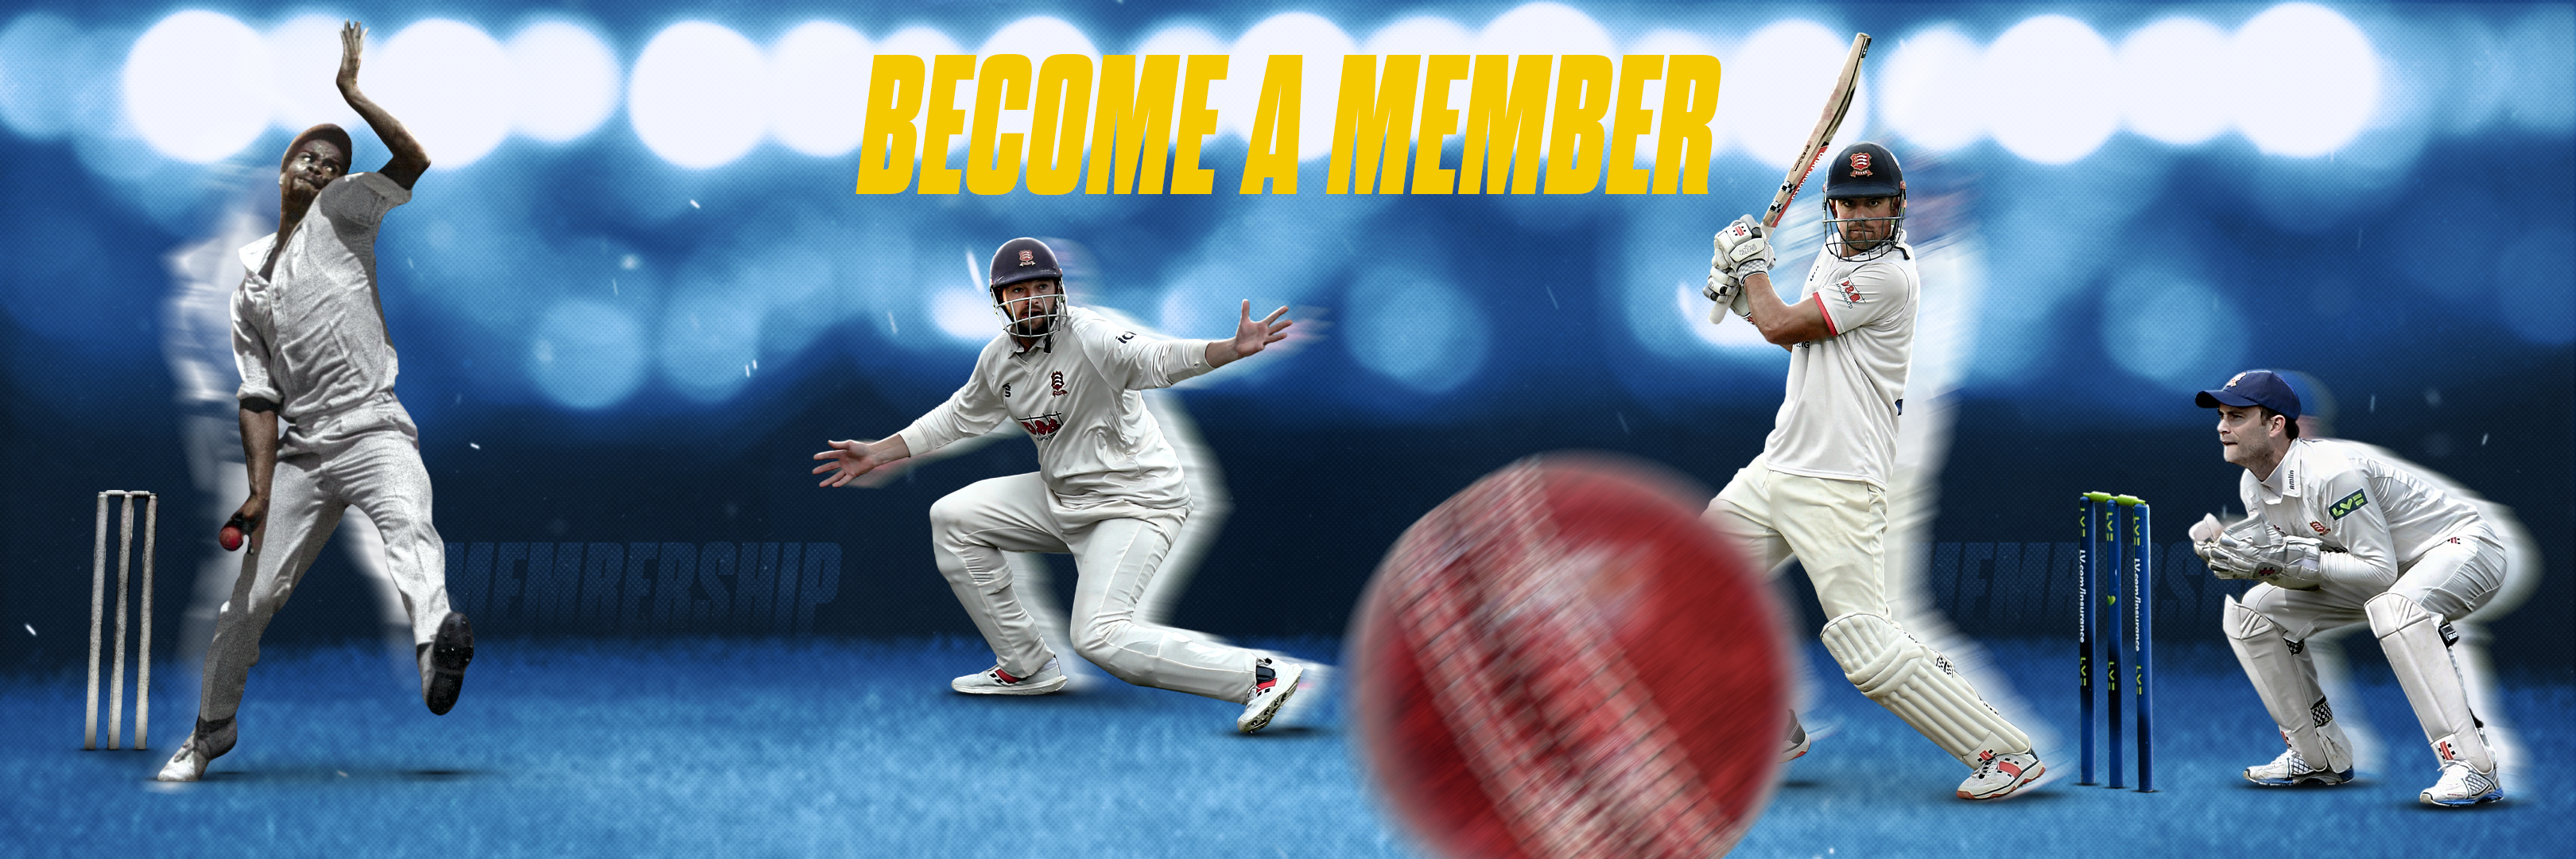 Become a Member banner